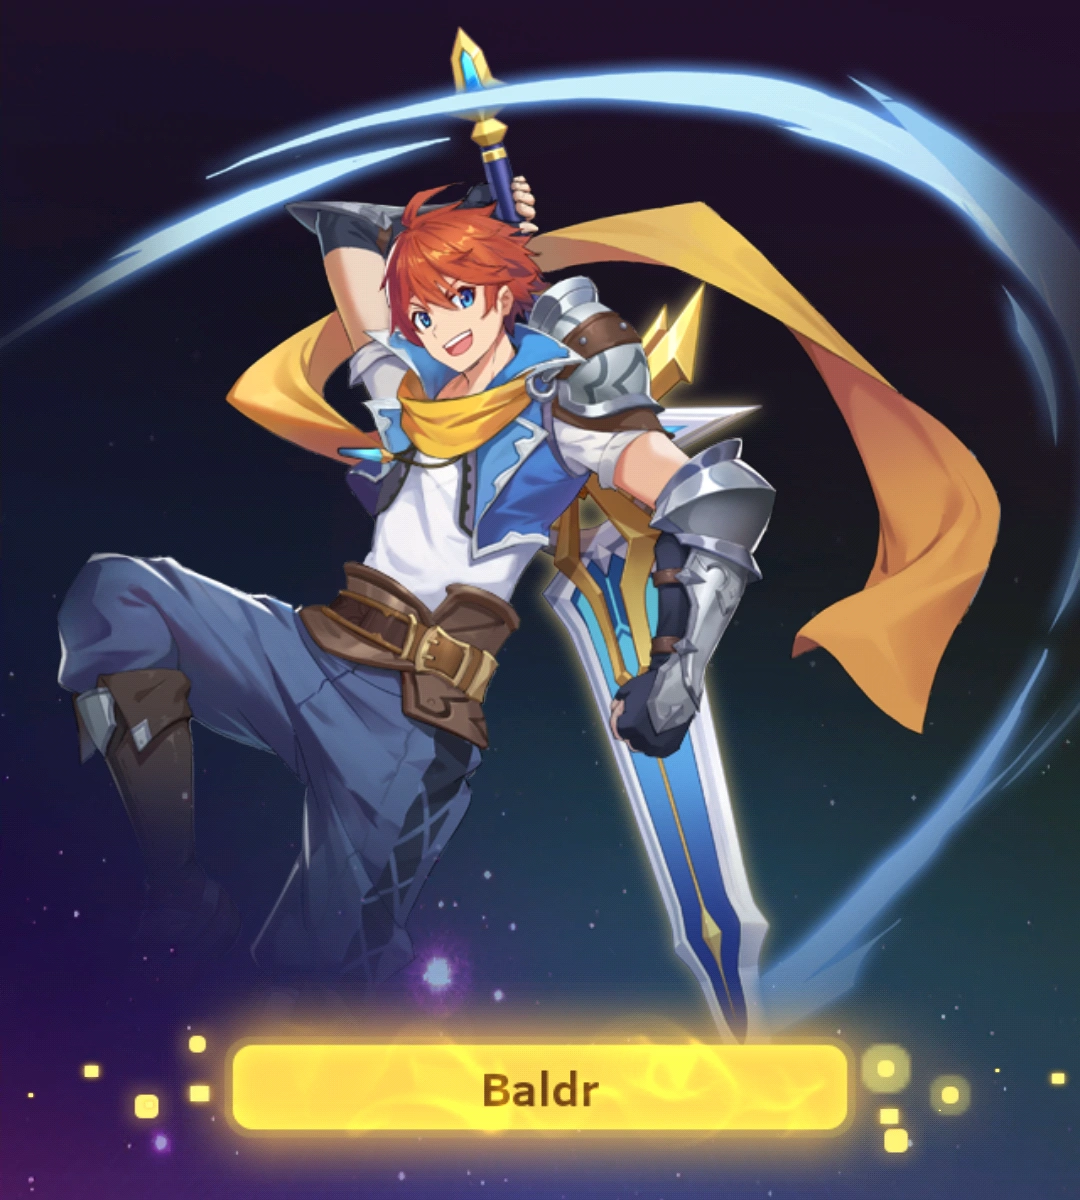 badlr character in Spiral warrior mod apk